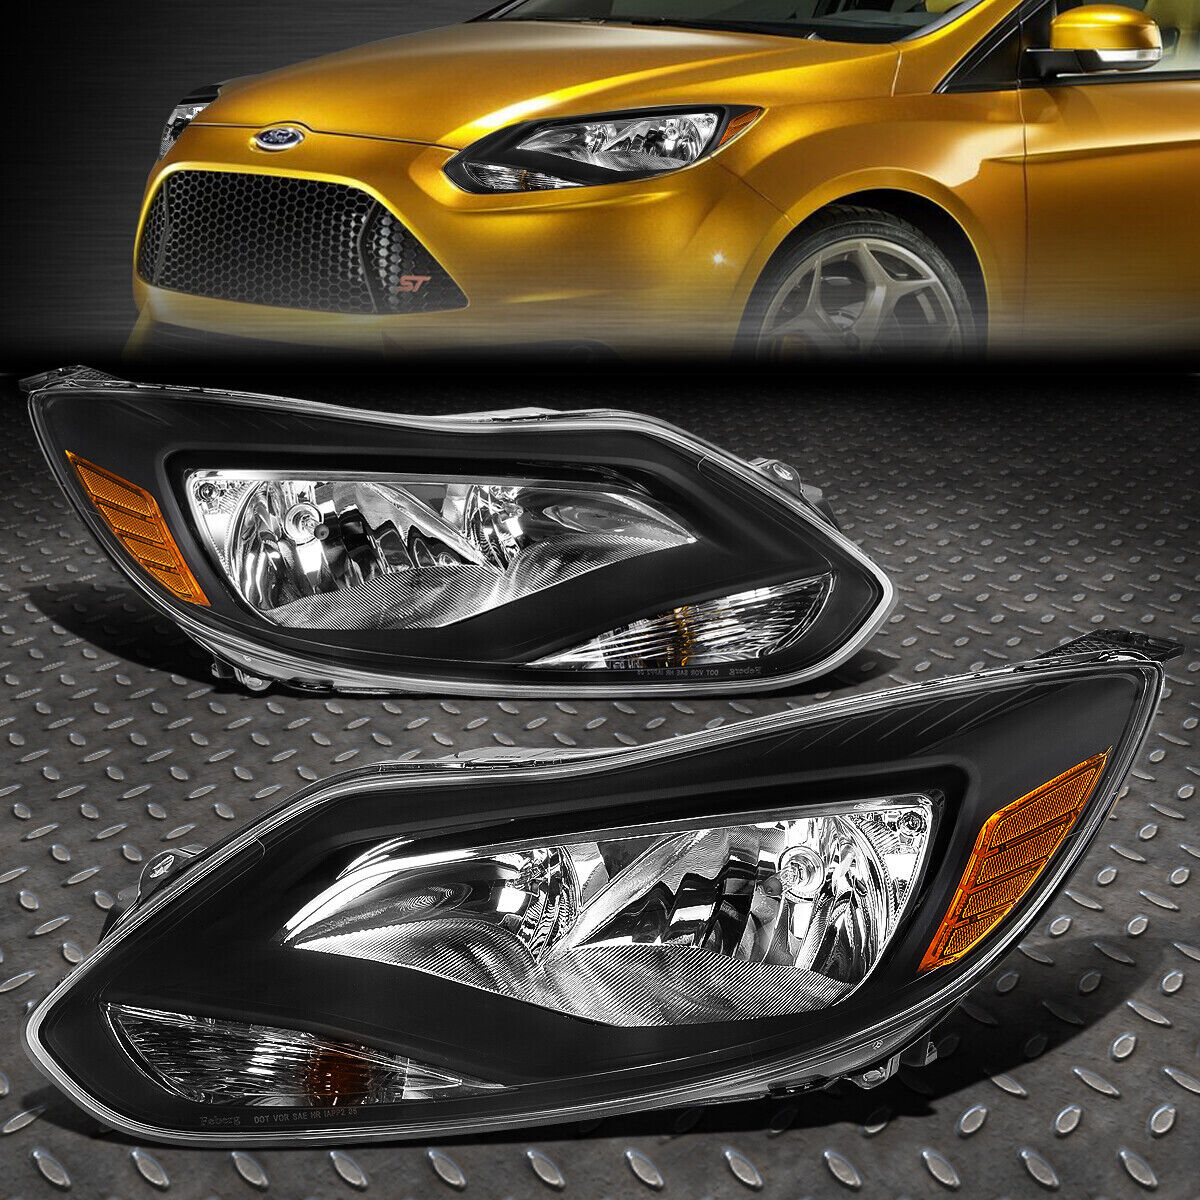 FOR 12-14 FORD FOCUS BLACK HOUSING AMBER CORNER HEADLIGHT REPLACEMENT HEAD LAMP